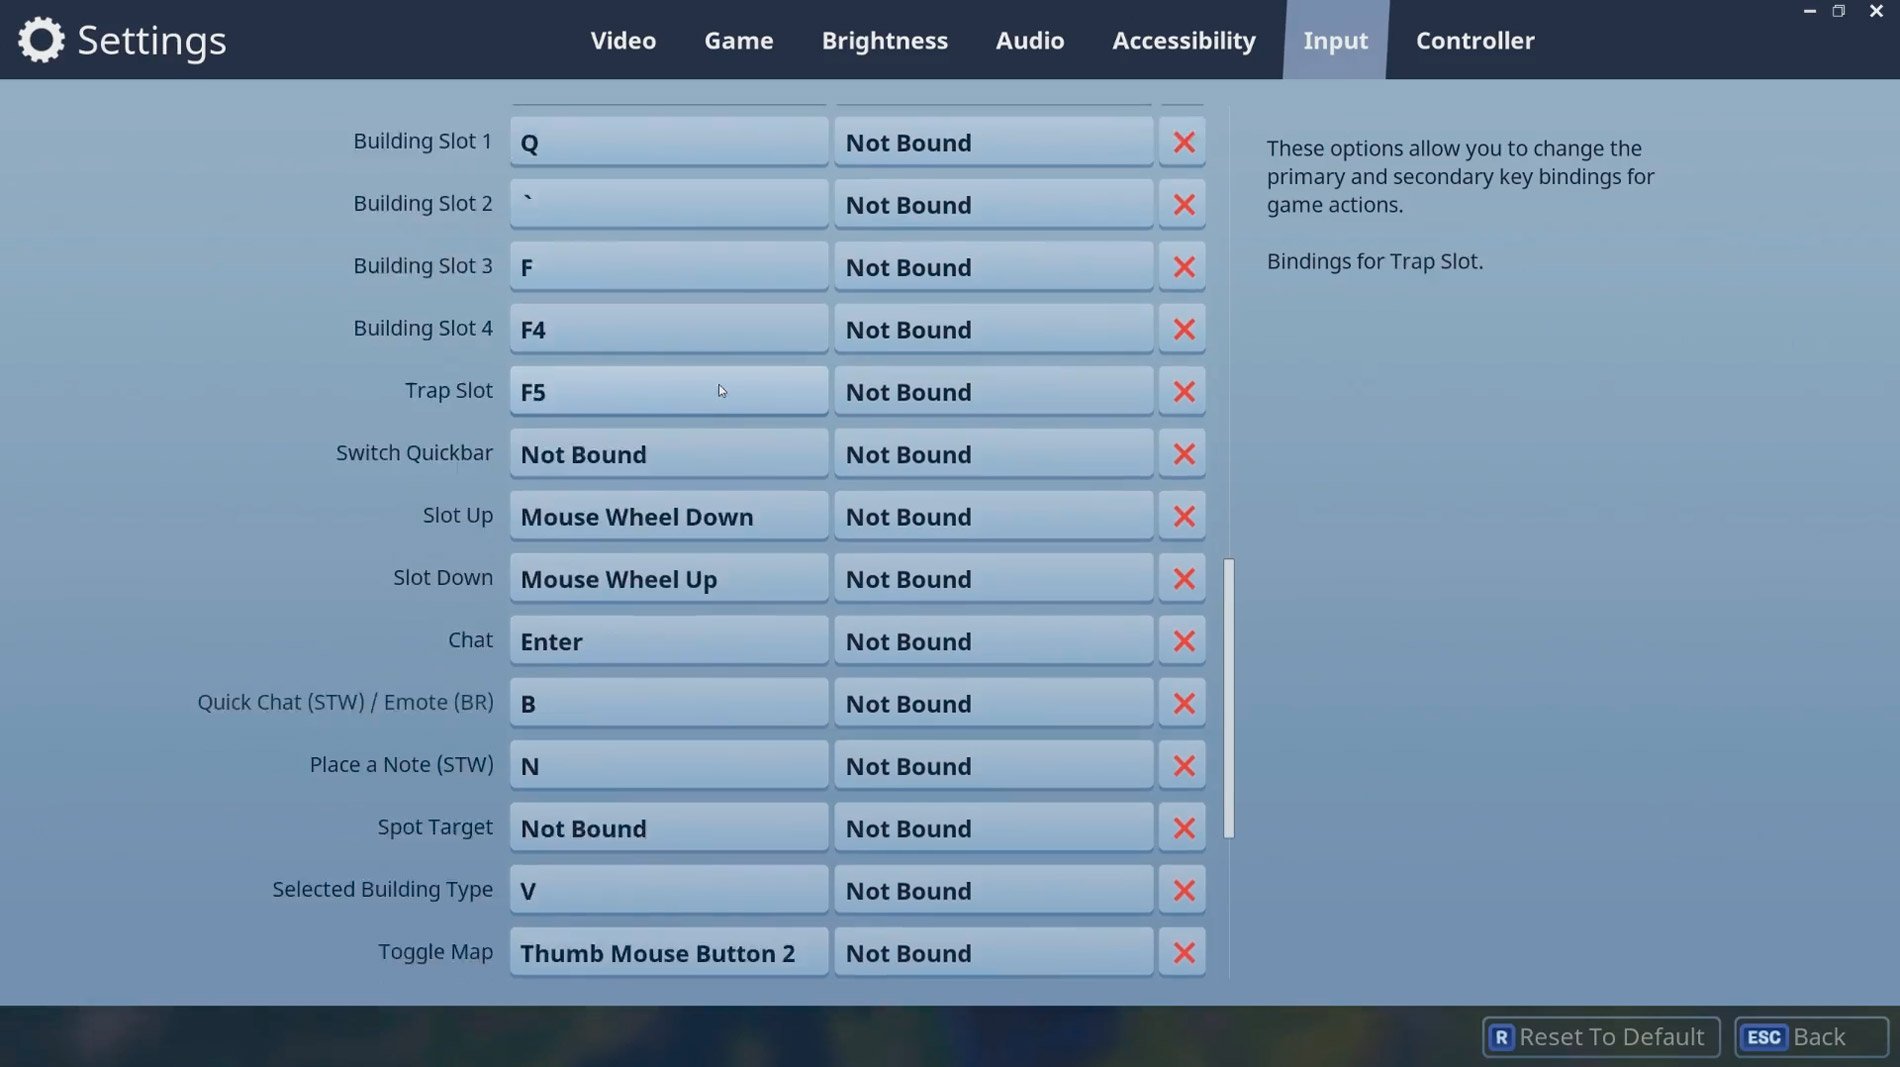 Drlupo Fortnite Settings Keybinds Config Gear 2019 - drlupo fortnite keybinds